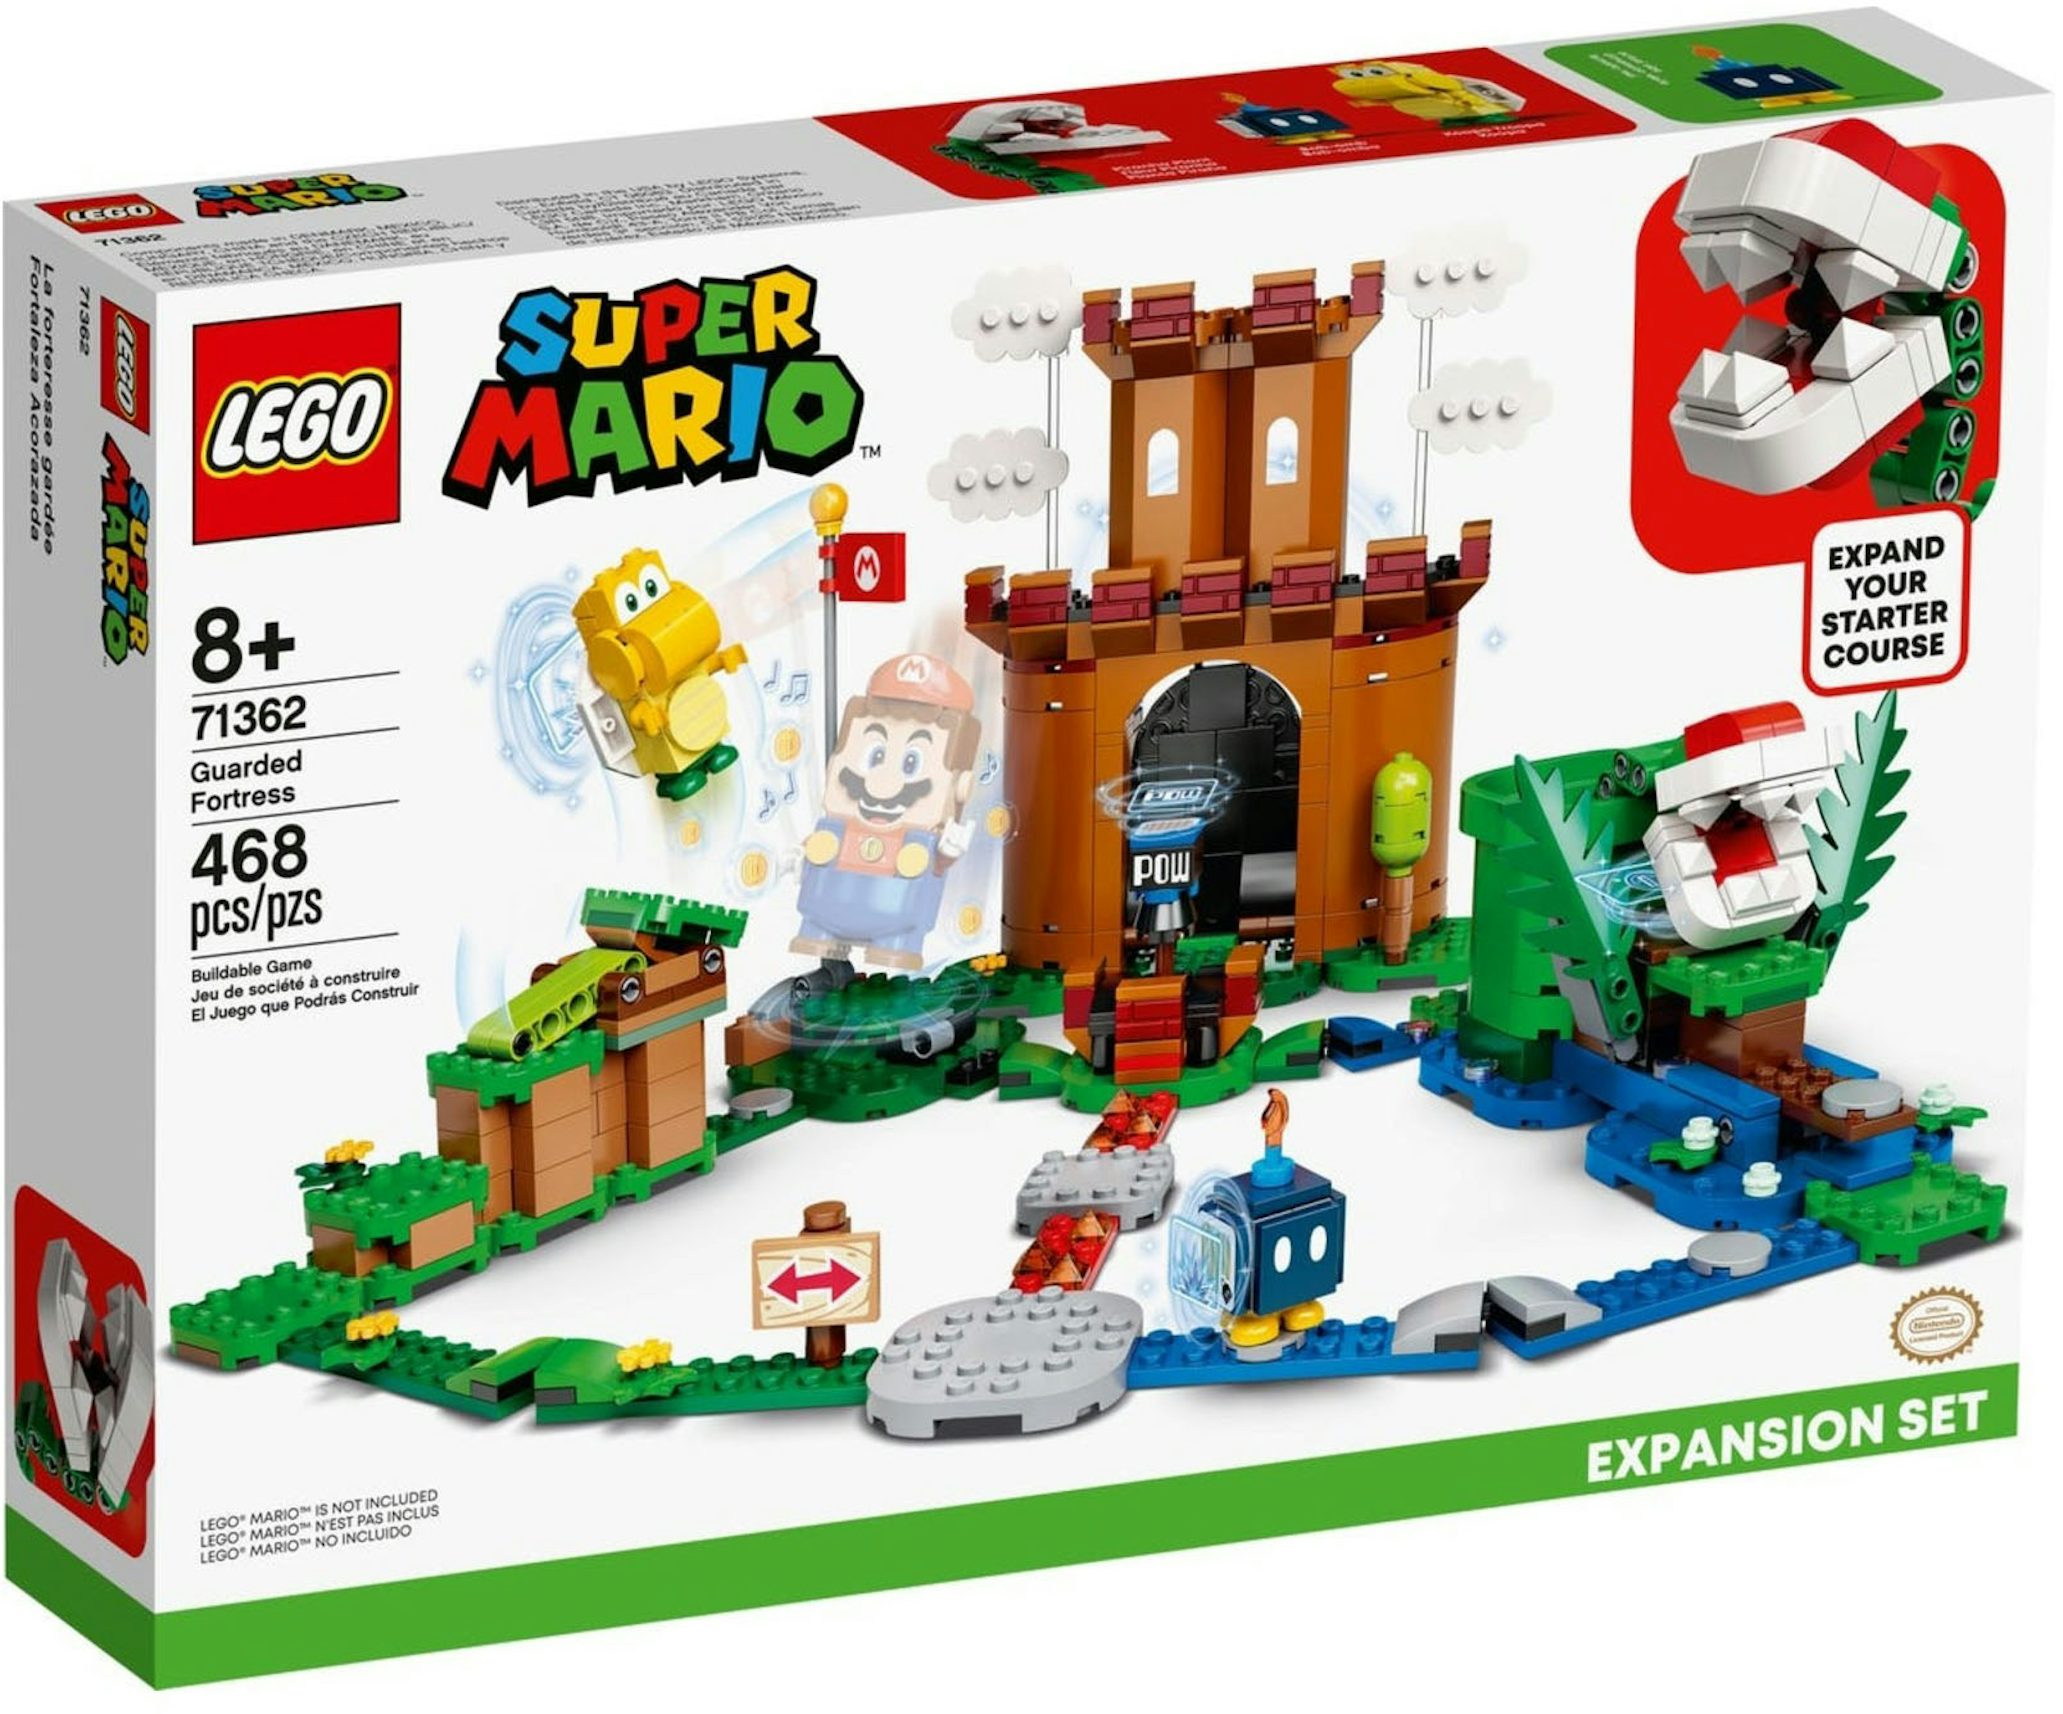 LEGO Super Mario Guarded Fortress Expansion Set 71362 - GB